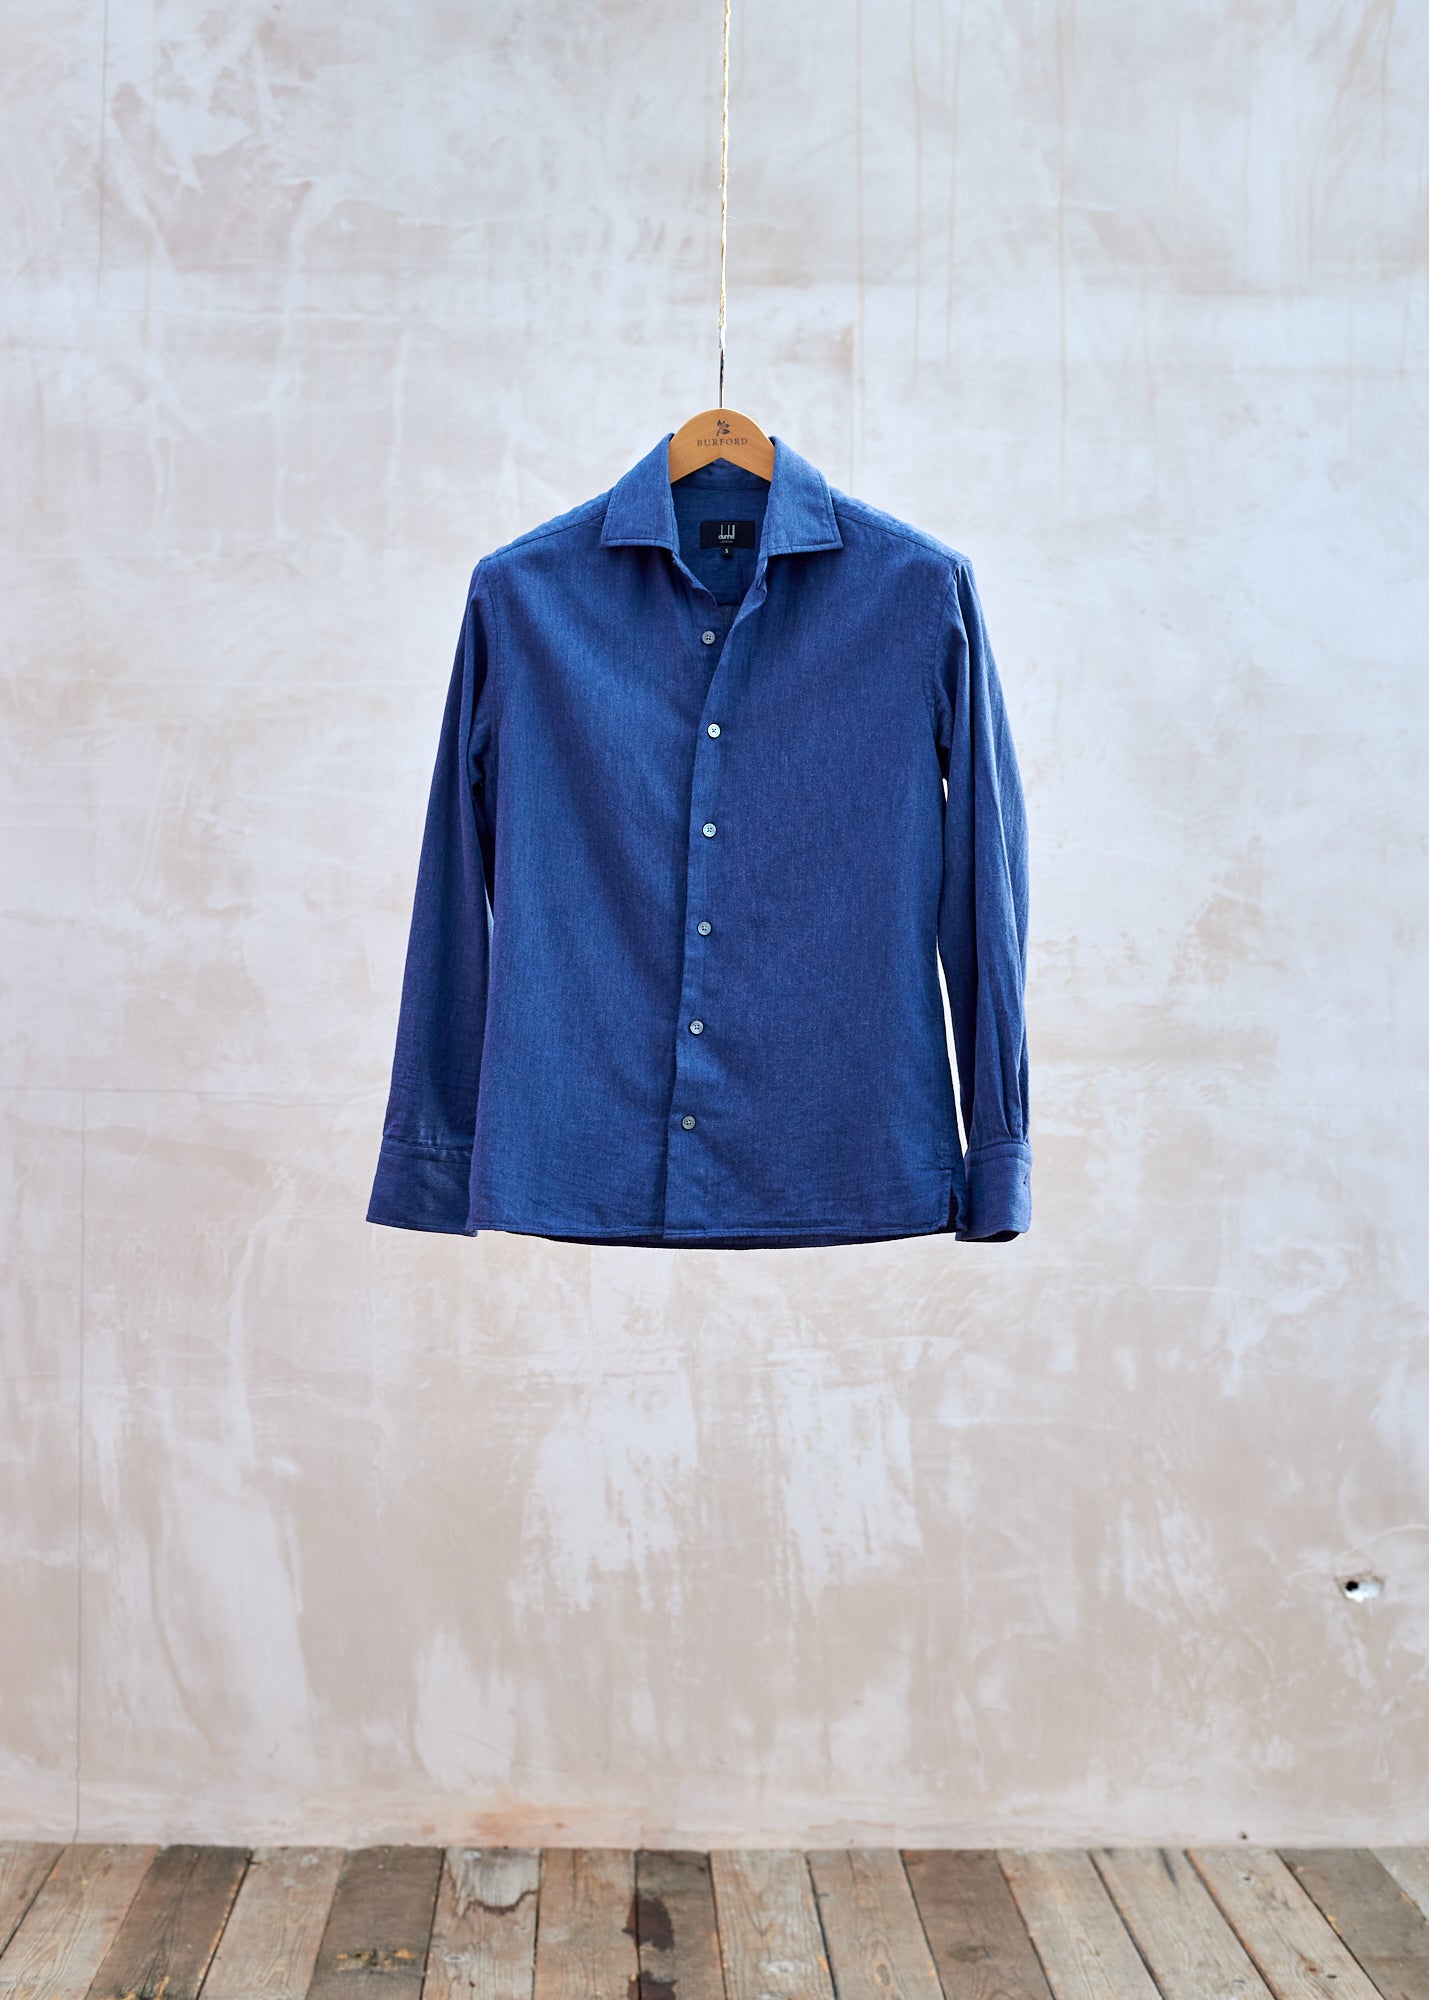 Dunhill Navy Brushed Cotton Shirt - S